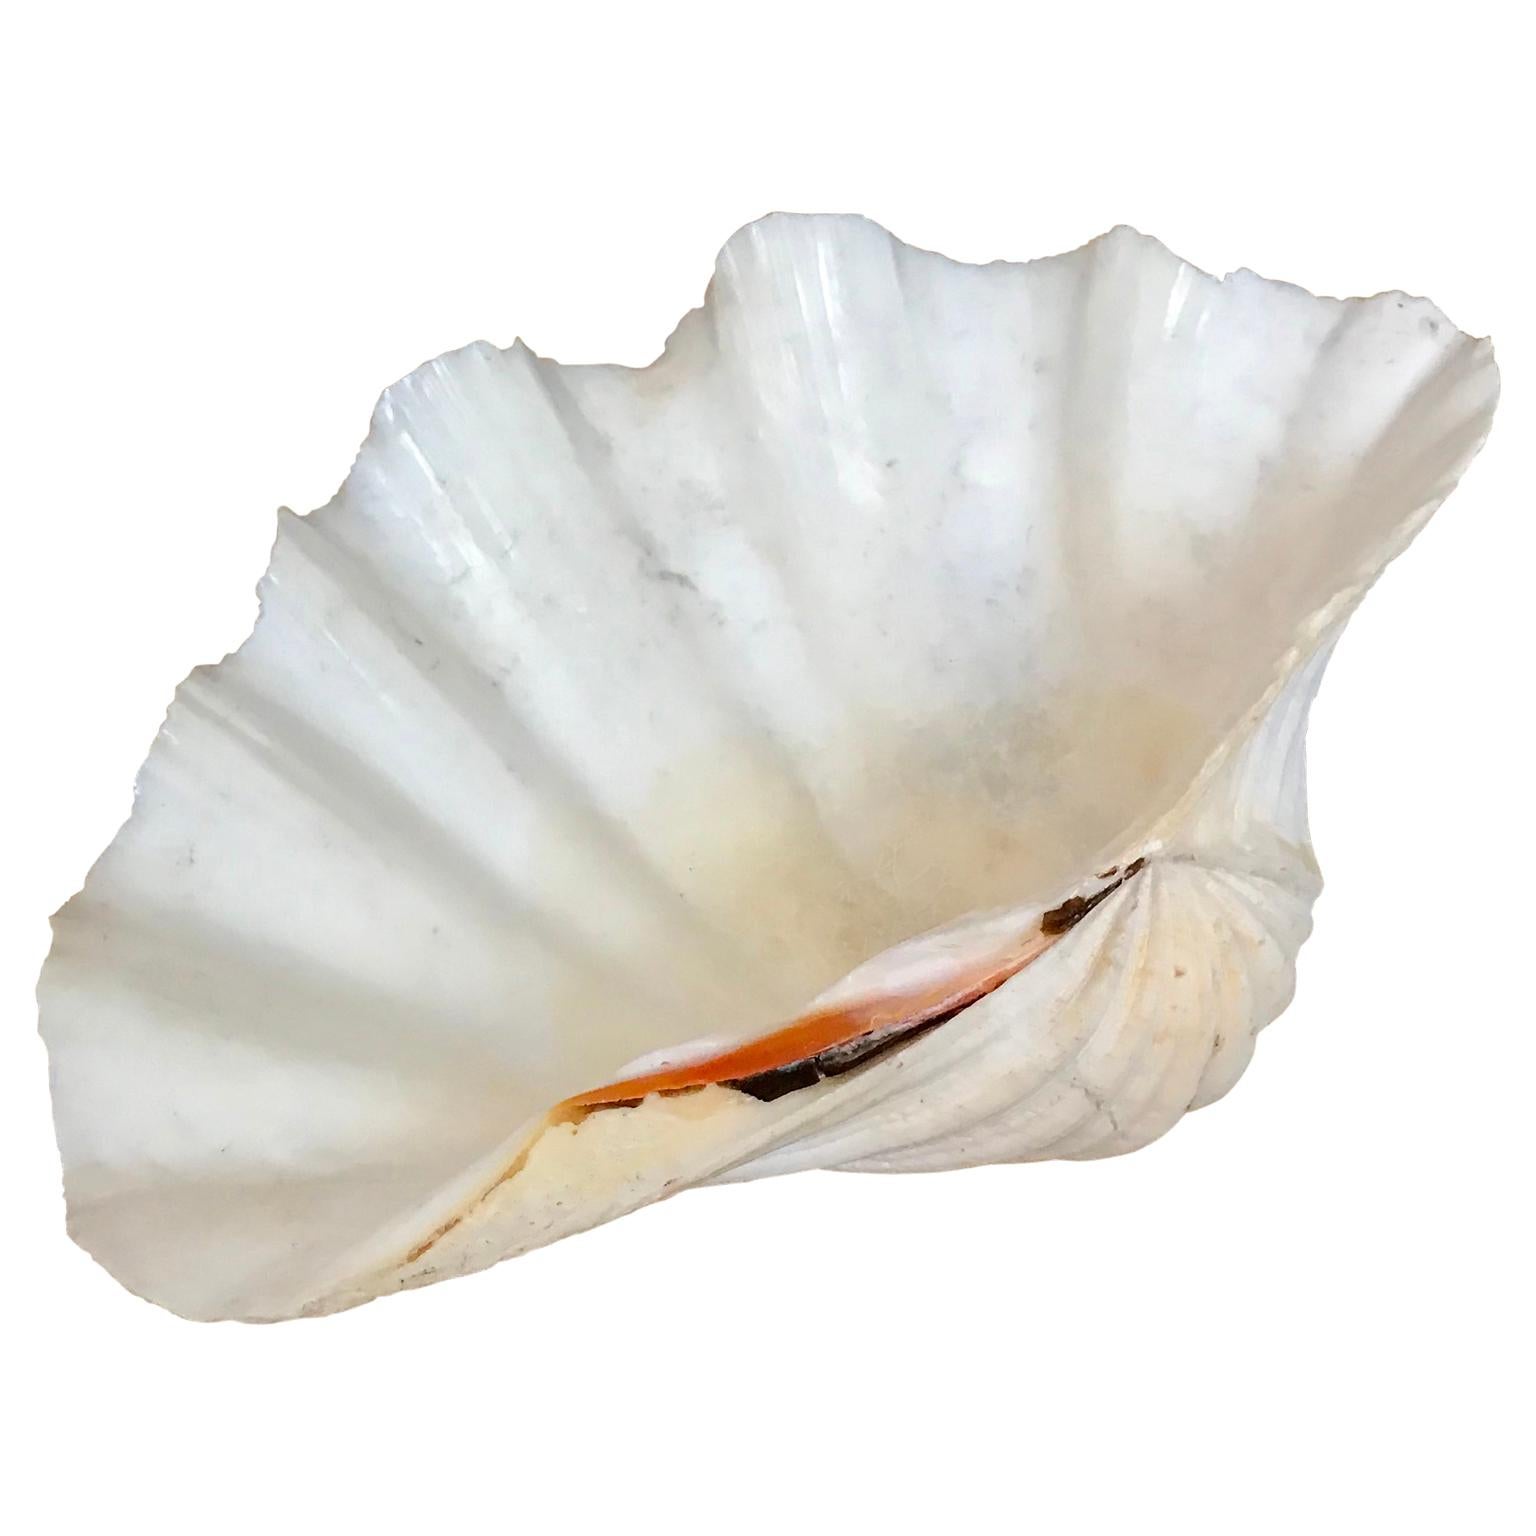 Large South Pacific Tridacna Gigas Clam shell

The shell is in very good condition and with a beautiful pink tint.
 